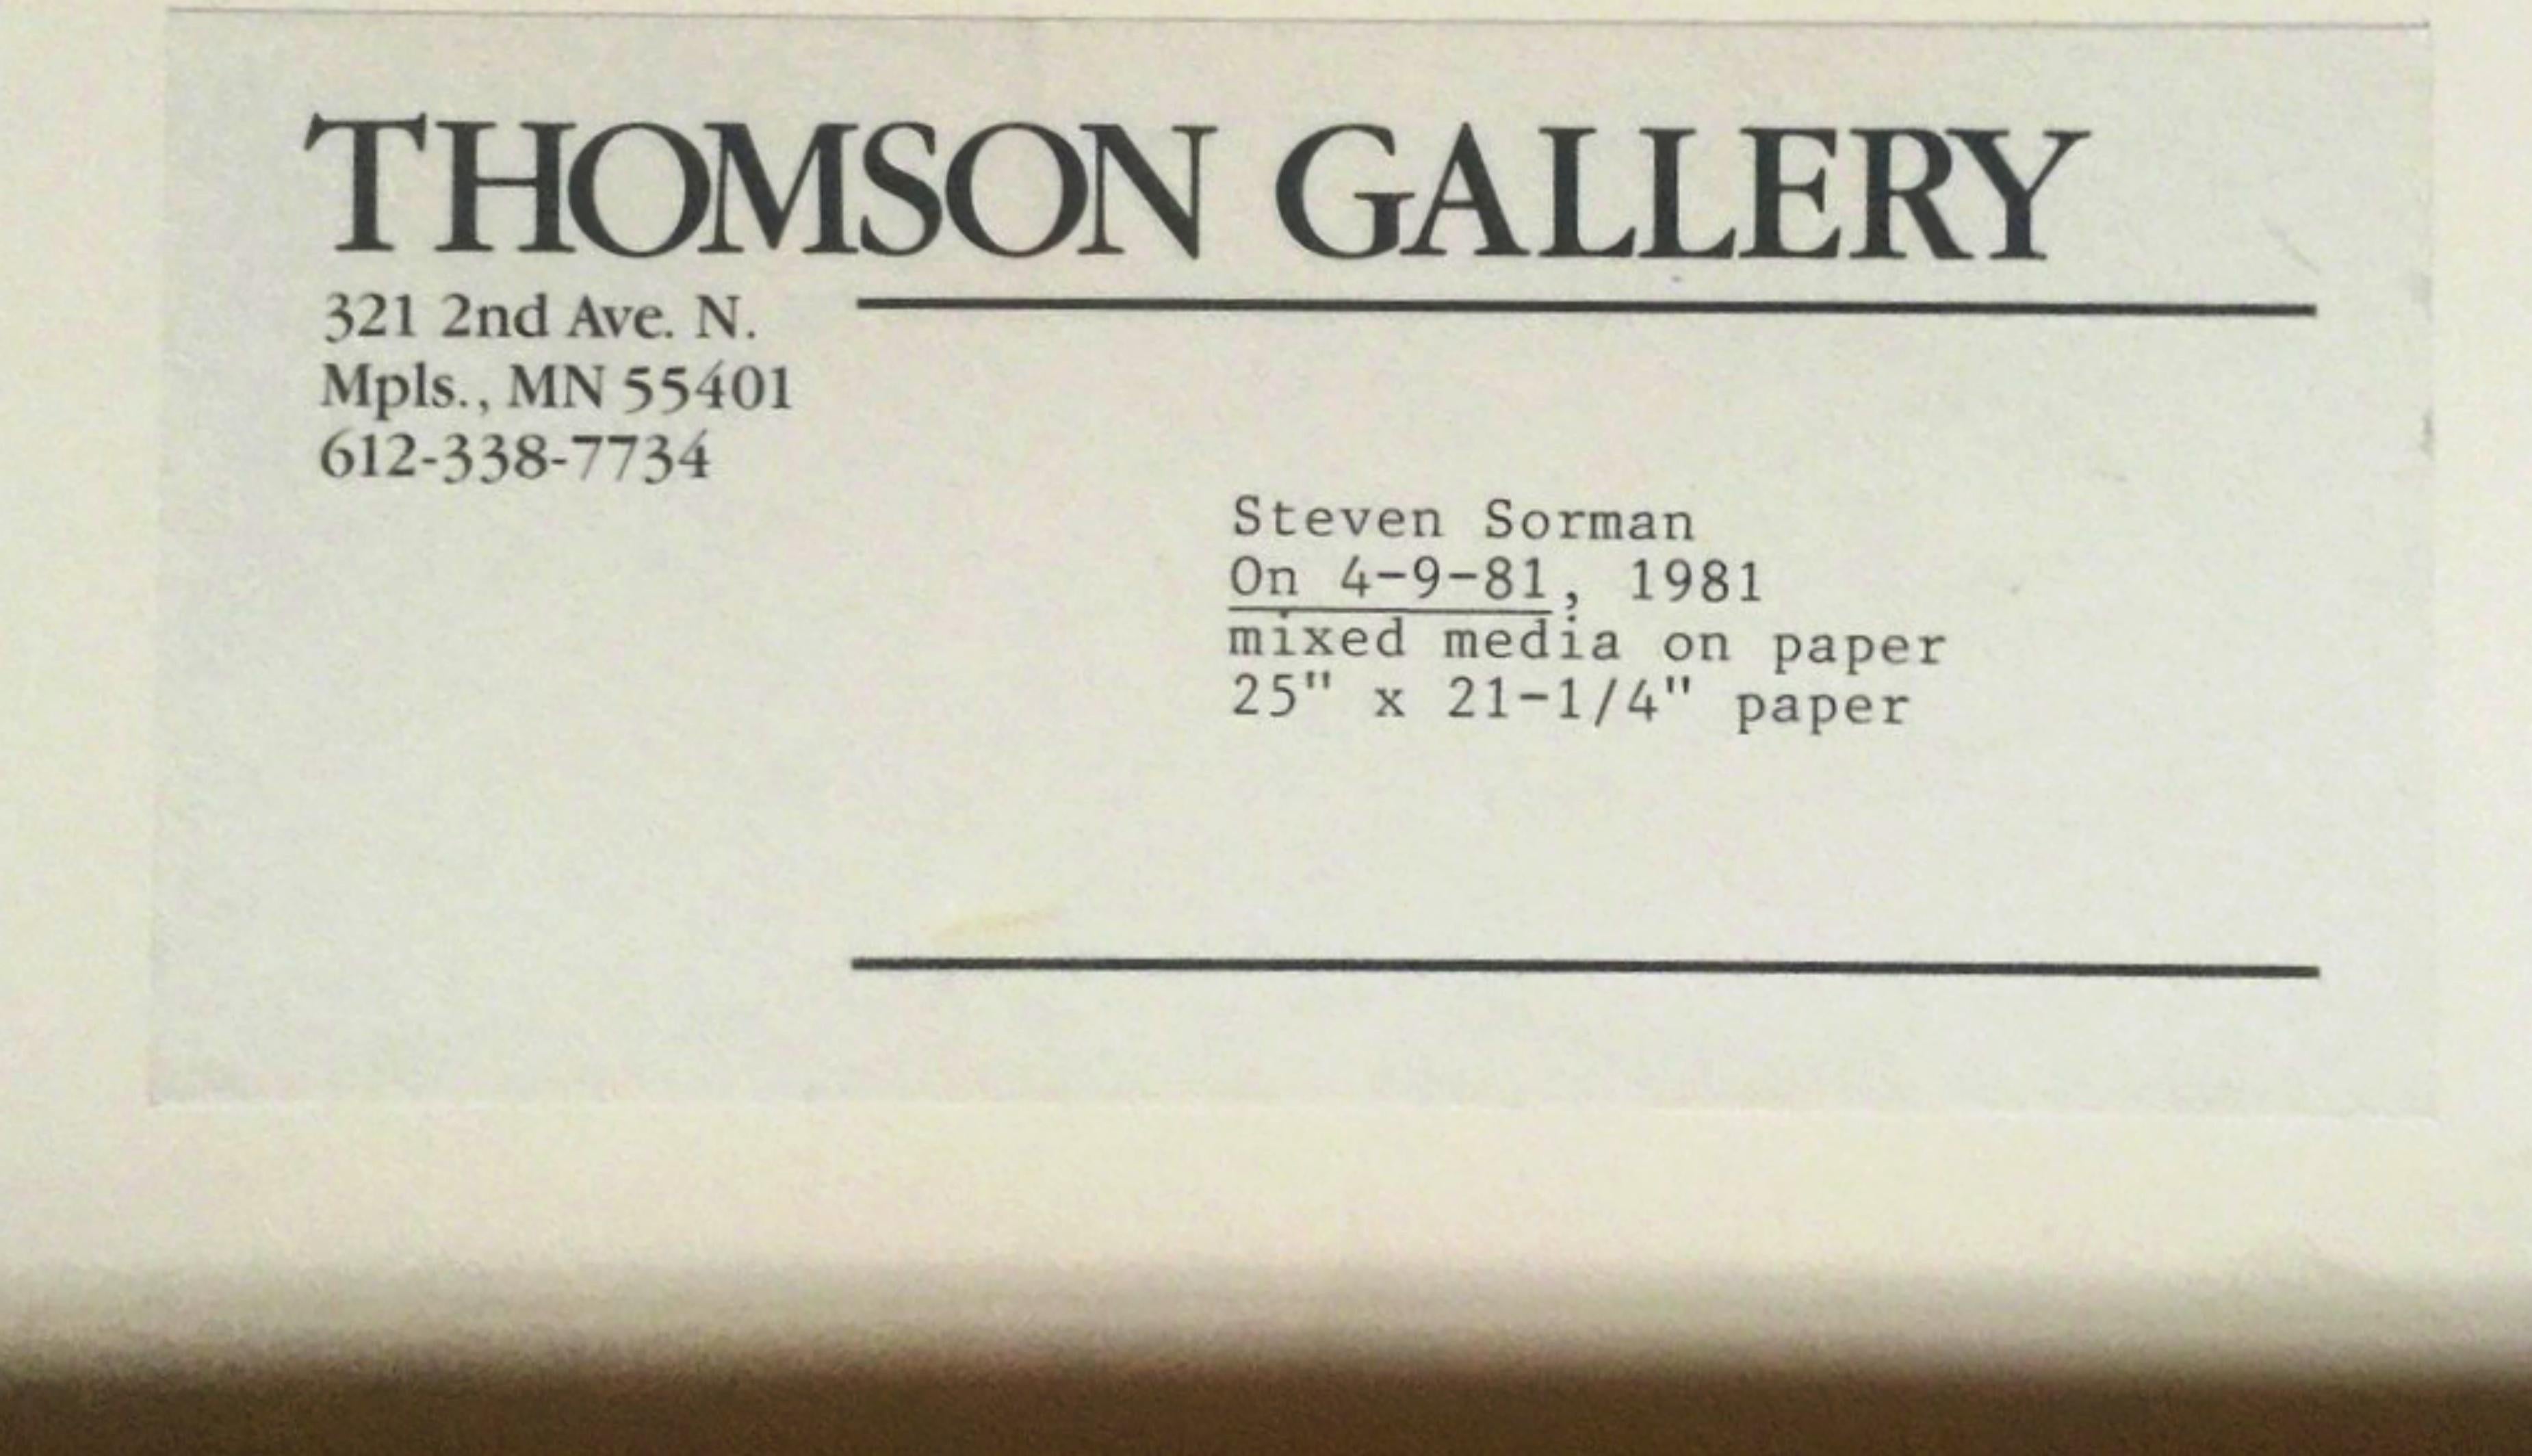 On April 9, 1981 - Abstract Expressionist Painting by Steven Sorman